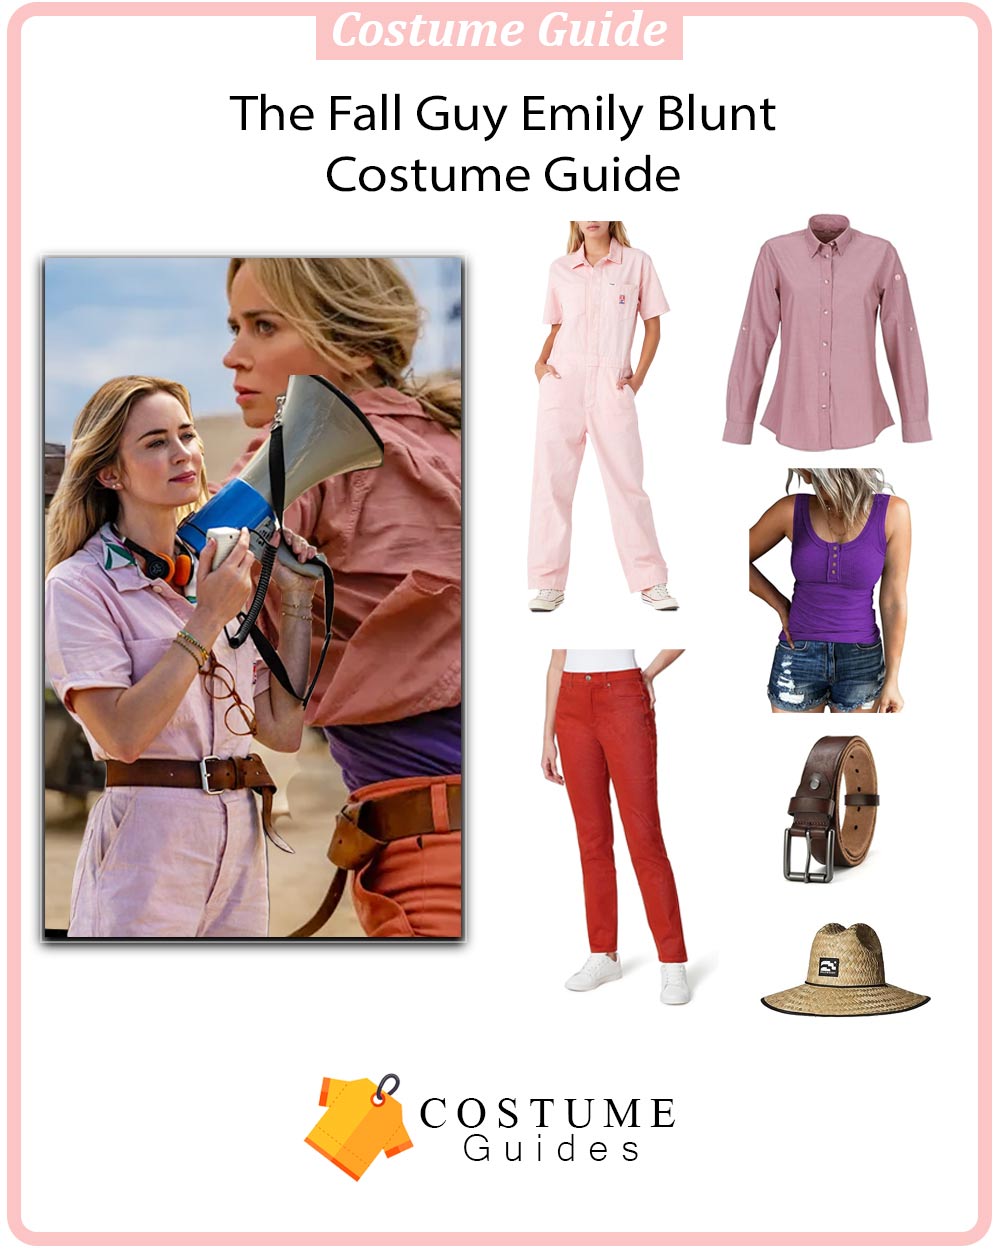 The Fall Guy Emily Blunt Costume